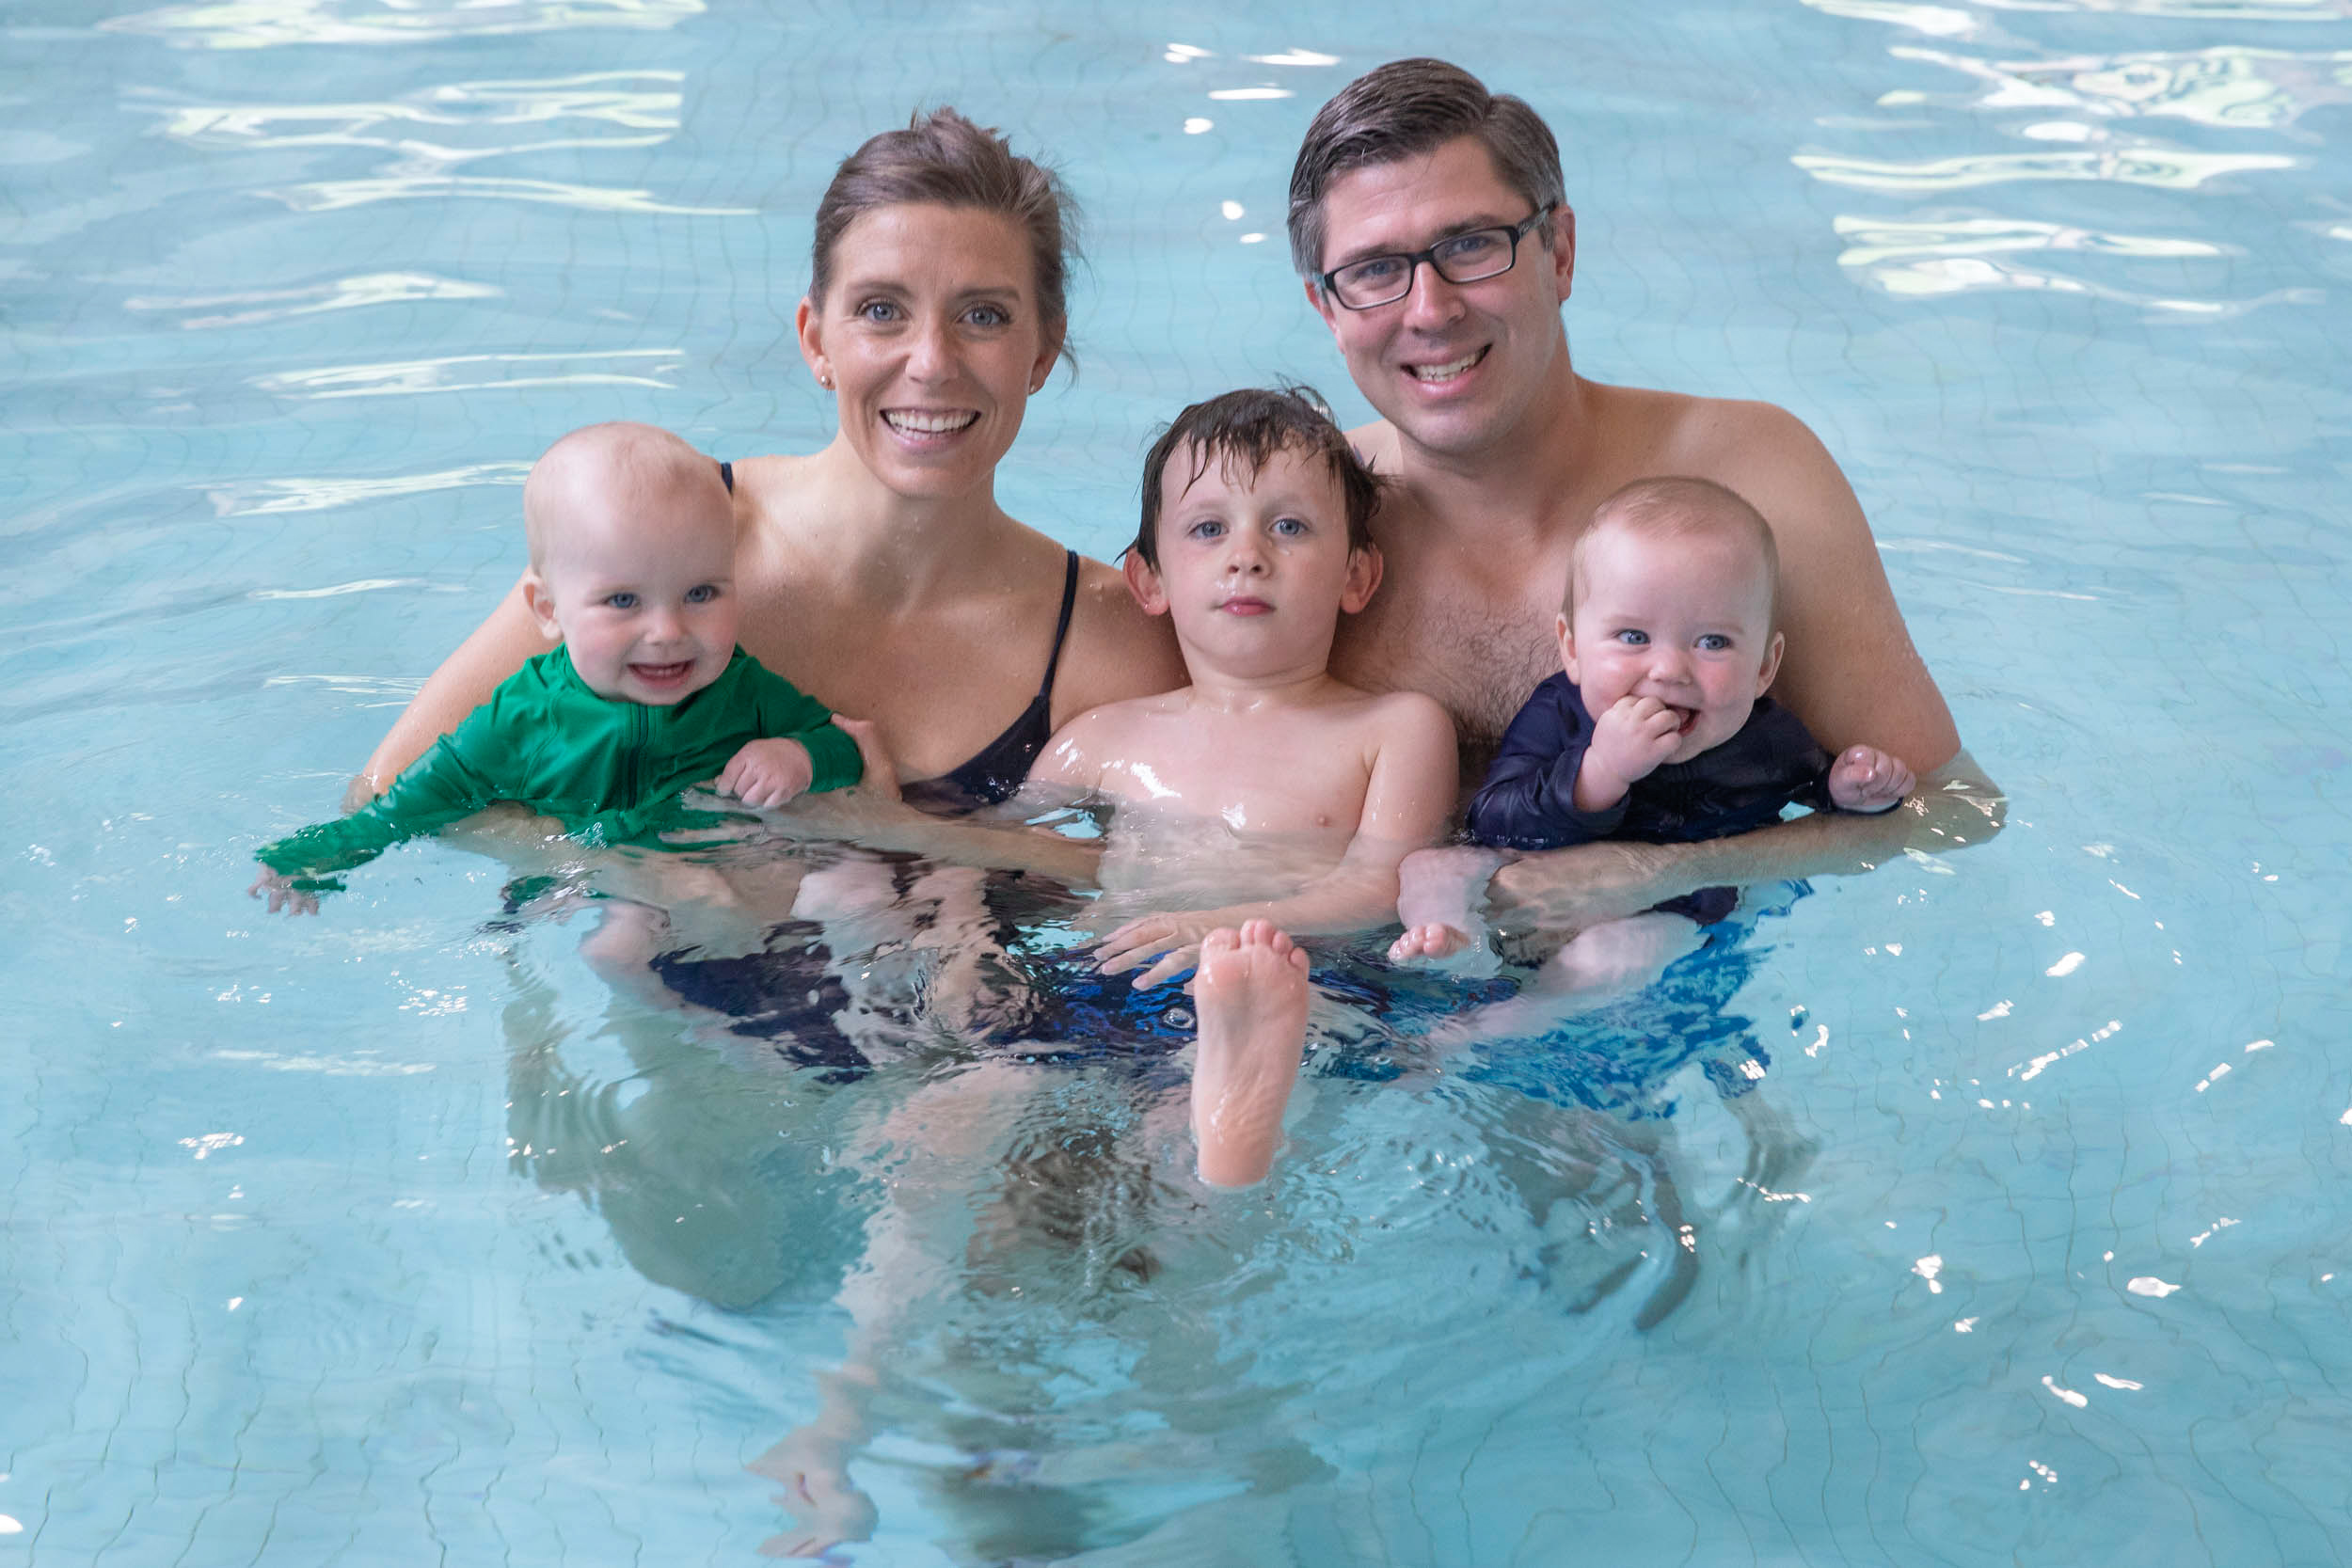 The Greenwoods pose together in the water with their three children